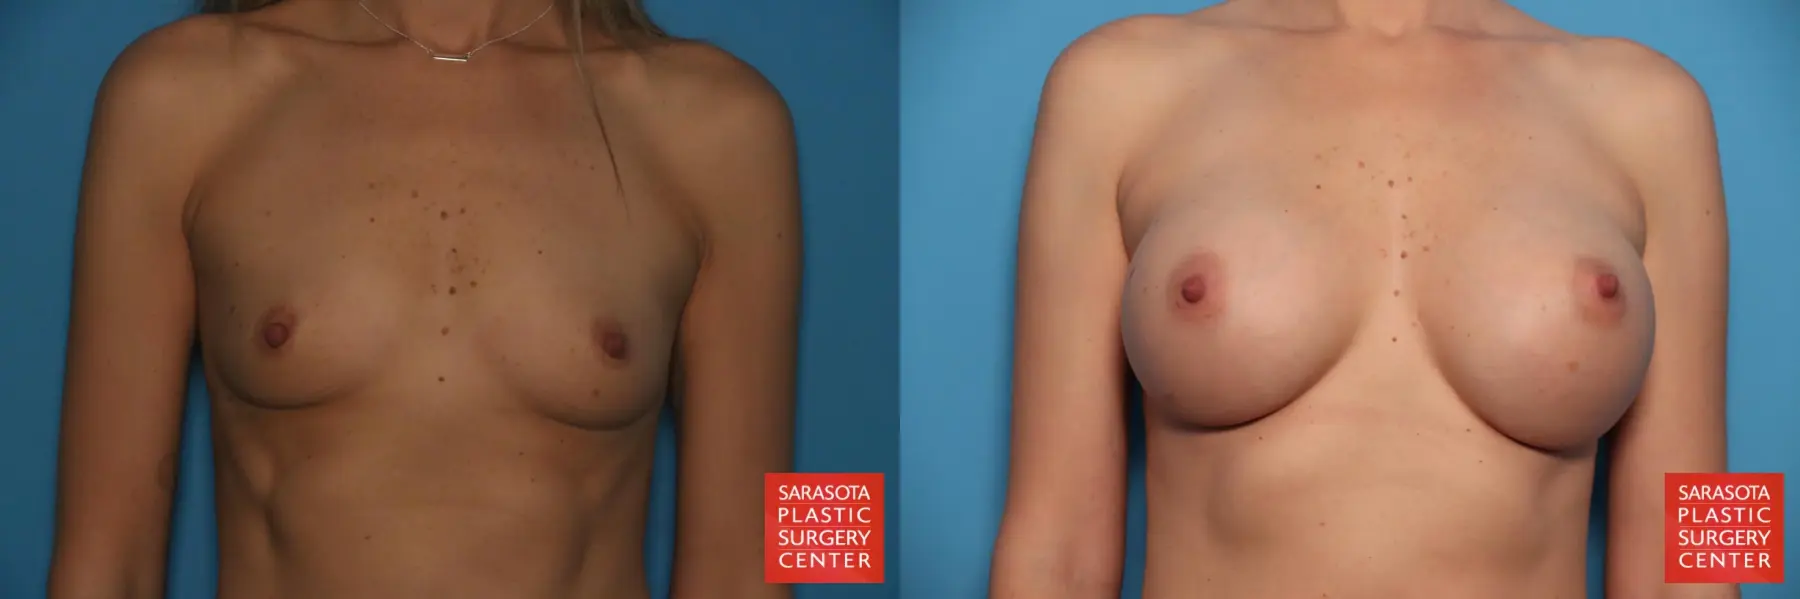 Breast Augmentation: Patient 76 - Before and After 1